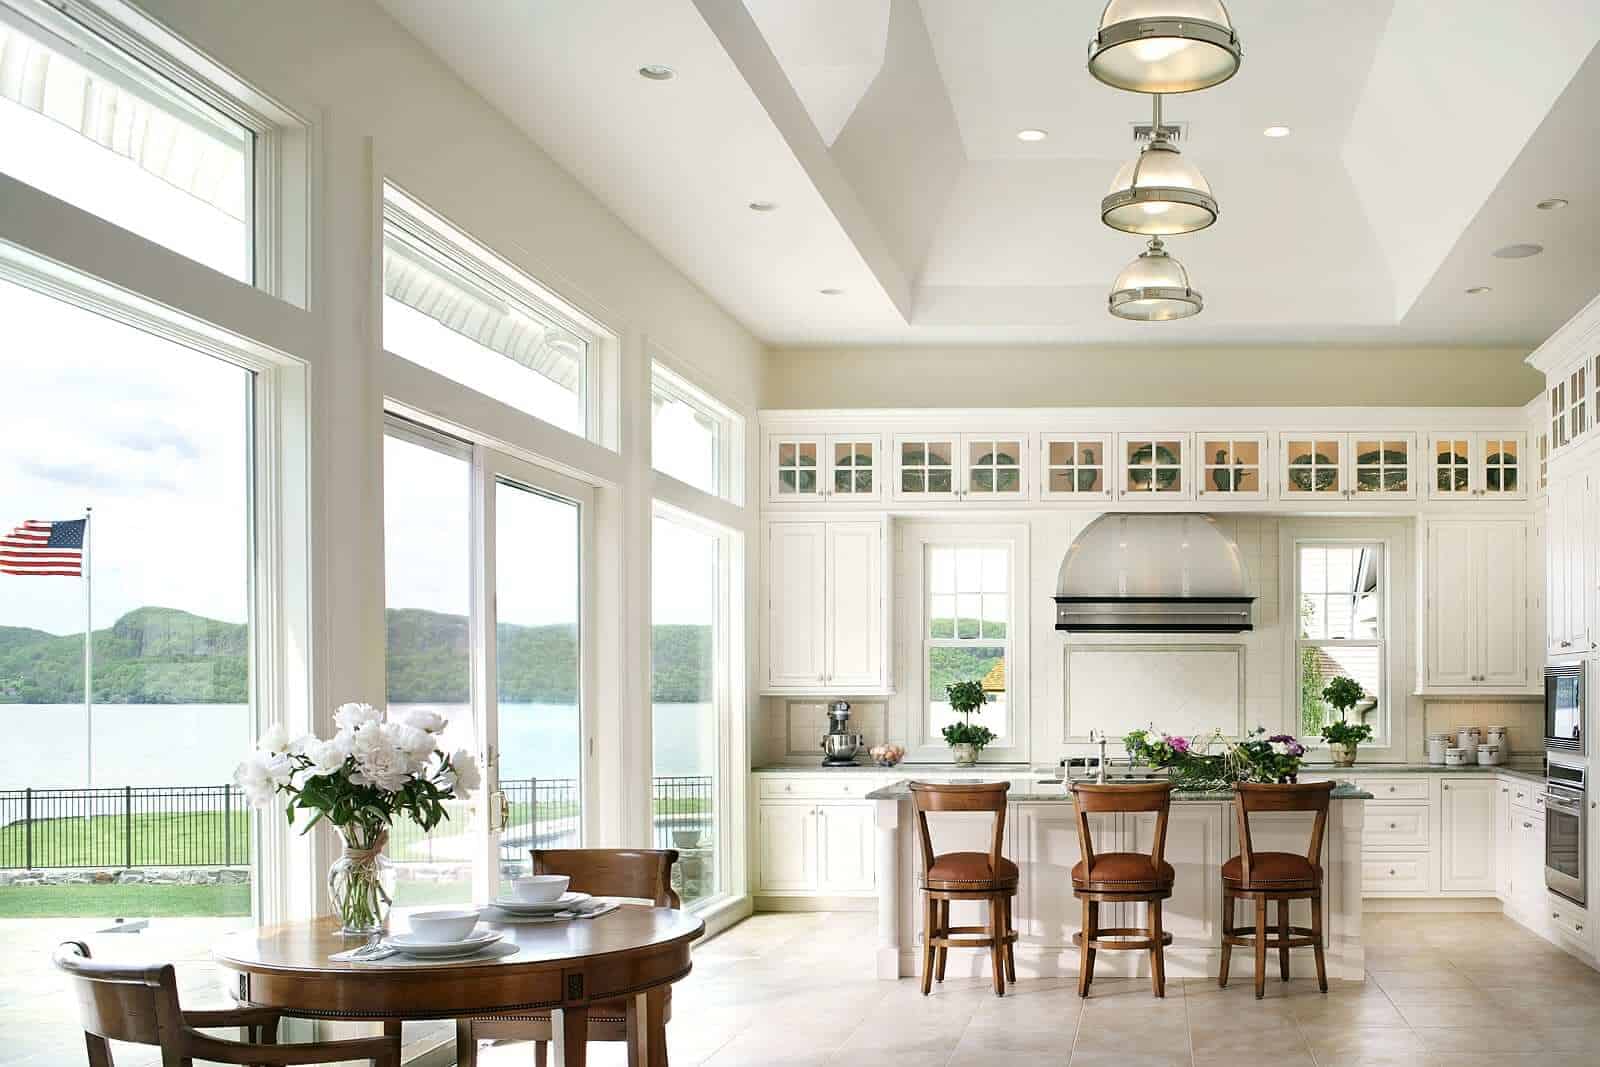 Sound view kitchen features tray ceiling and white raised panel Bilotta cabinetry, including lit, glass front top display cabinets.